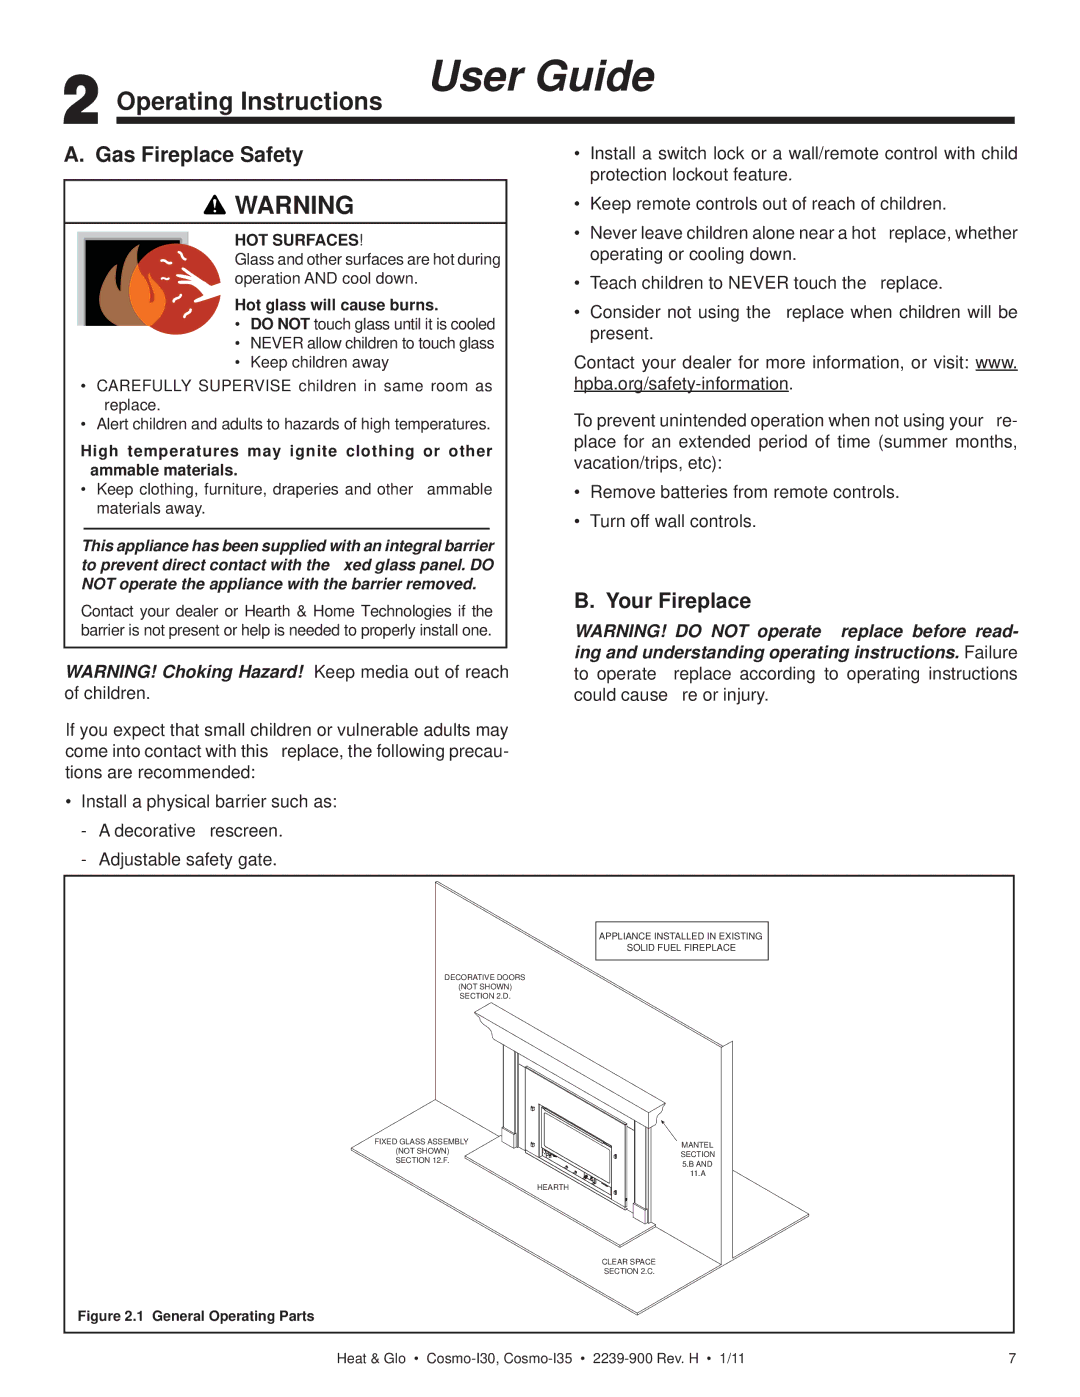 Heat & Glo LifeStyle COSMO-I30, COSMO-I35 Operating Instructions User Guide, Gas Fireplace Safety, Your Fireplace 